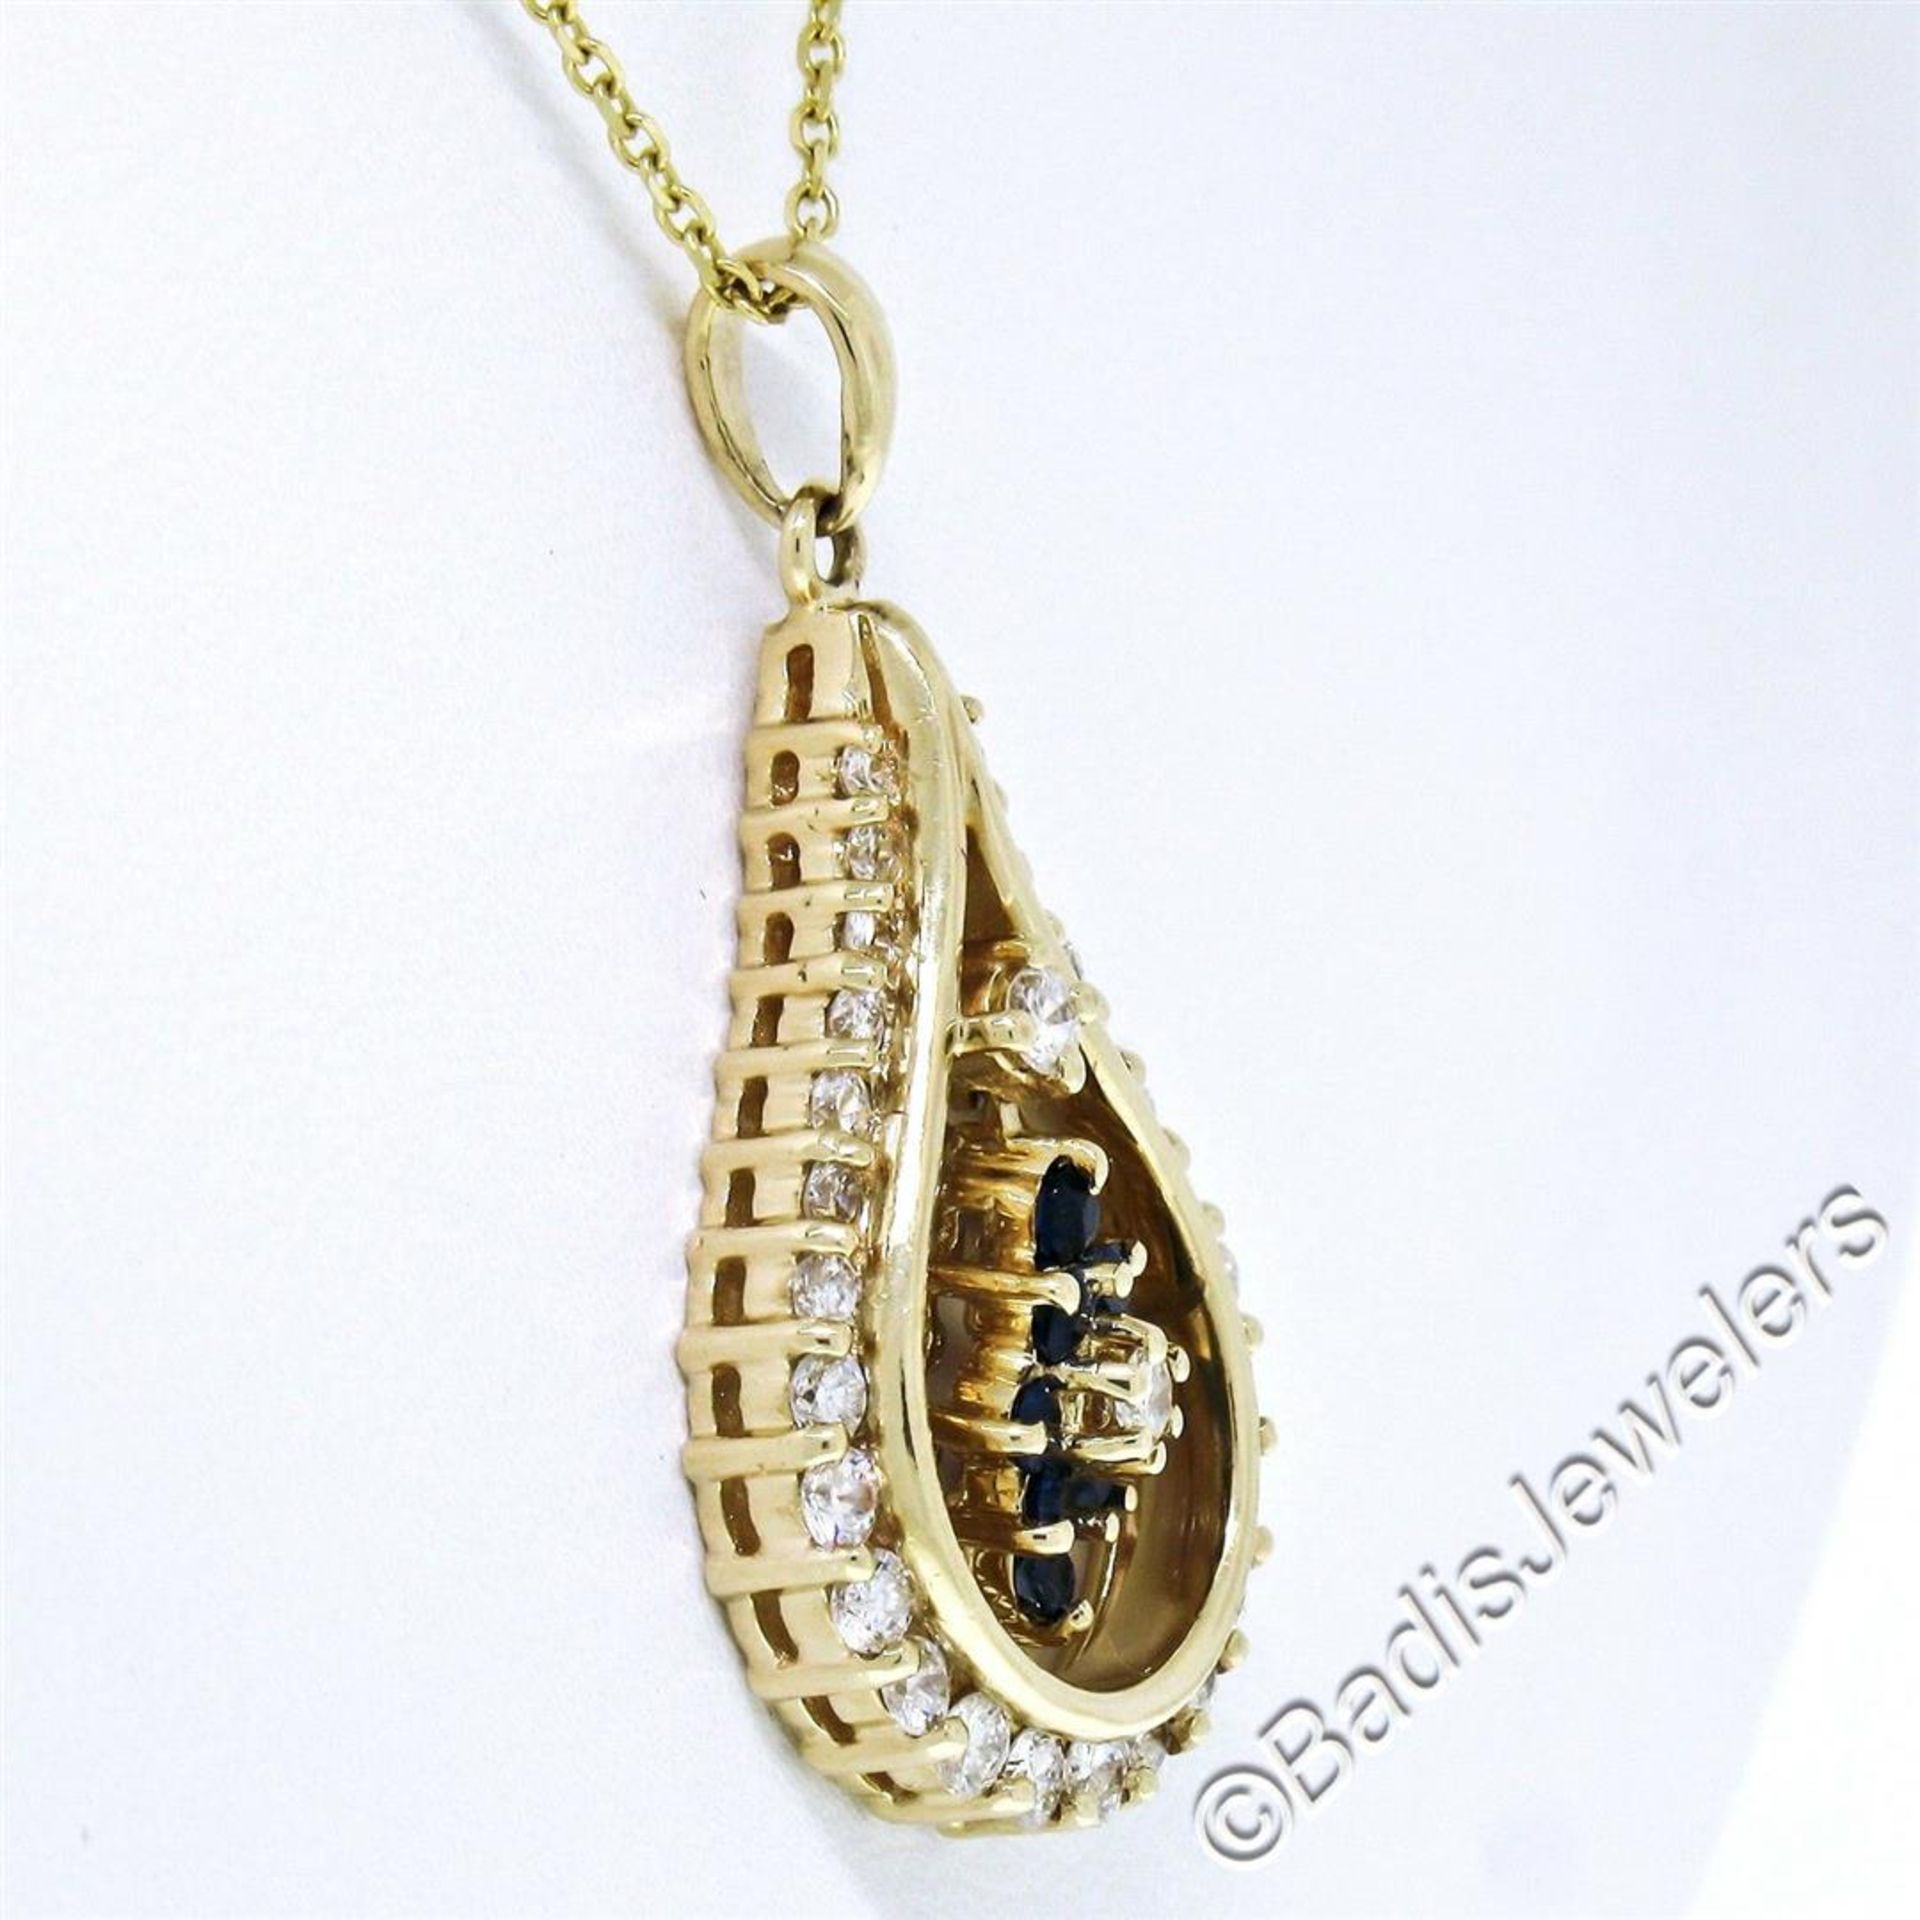 14kt Yellow Gold 1.22ctw Diamond and Sapphire Tear Drop Dangle Pendant Necklace - Image 5 of 7